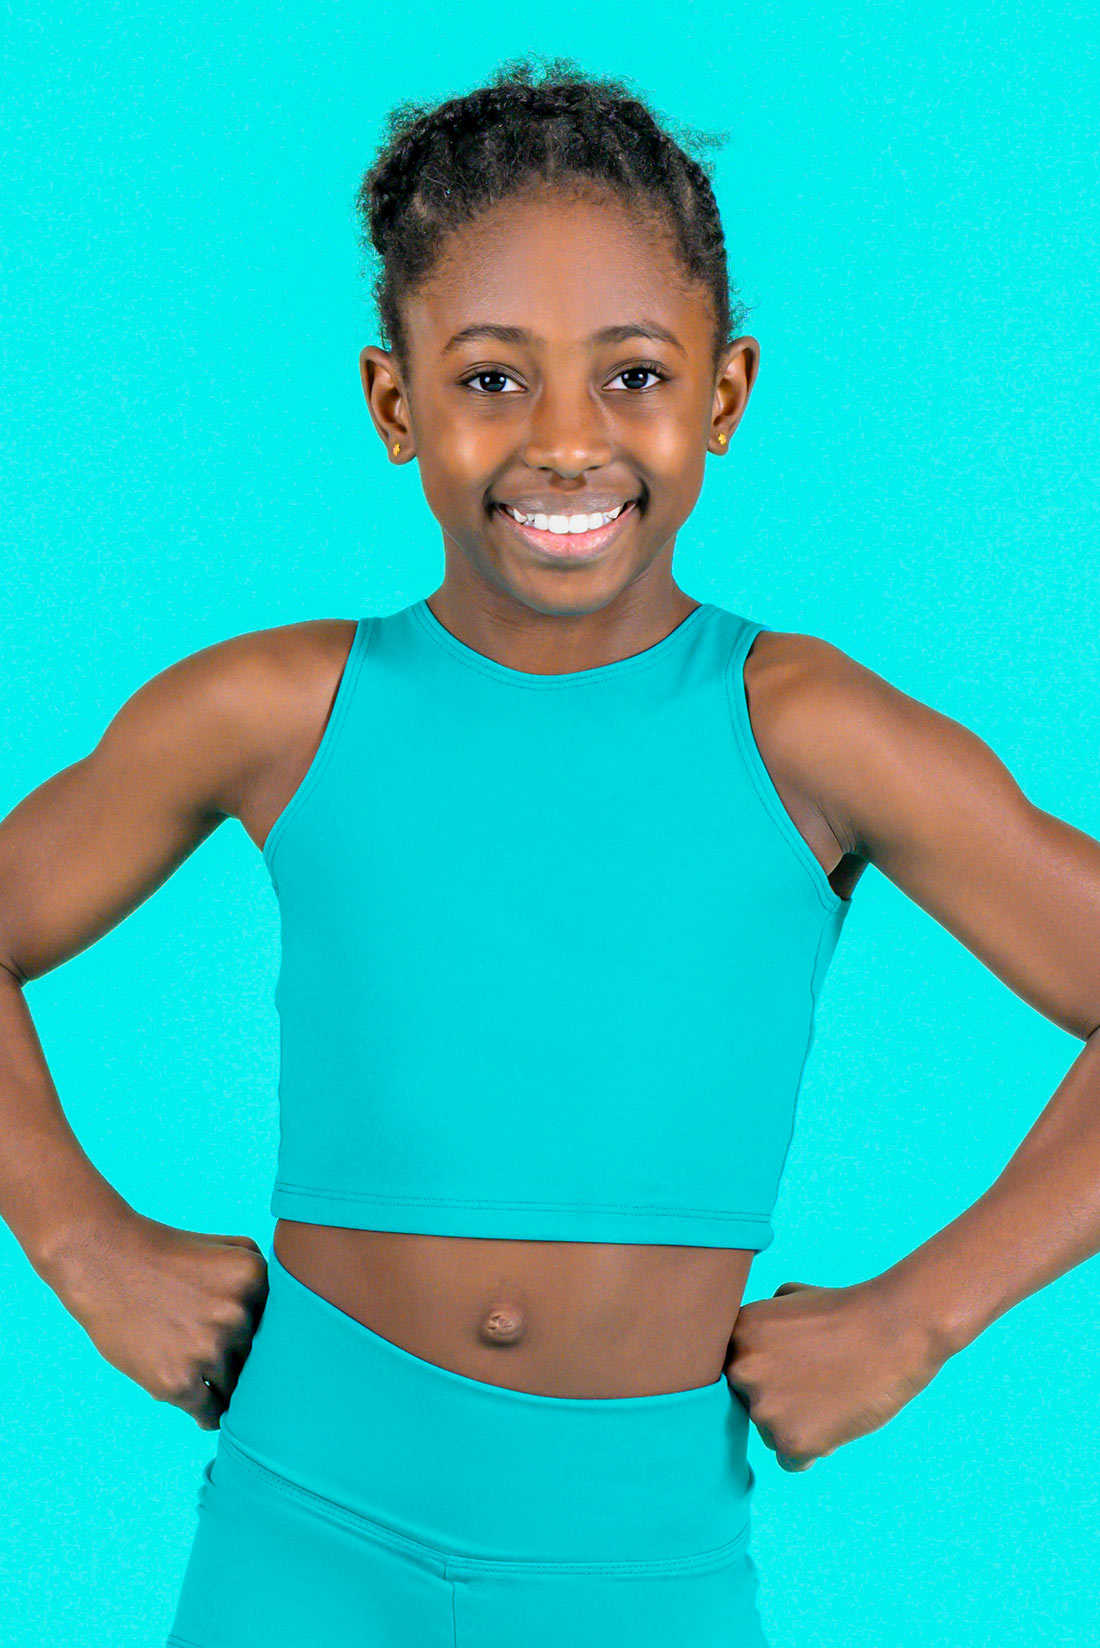 Turquoise athletic tank top for girls by Destira, 2024